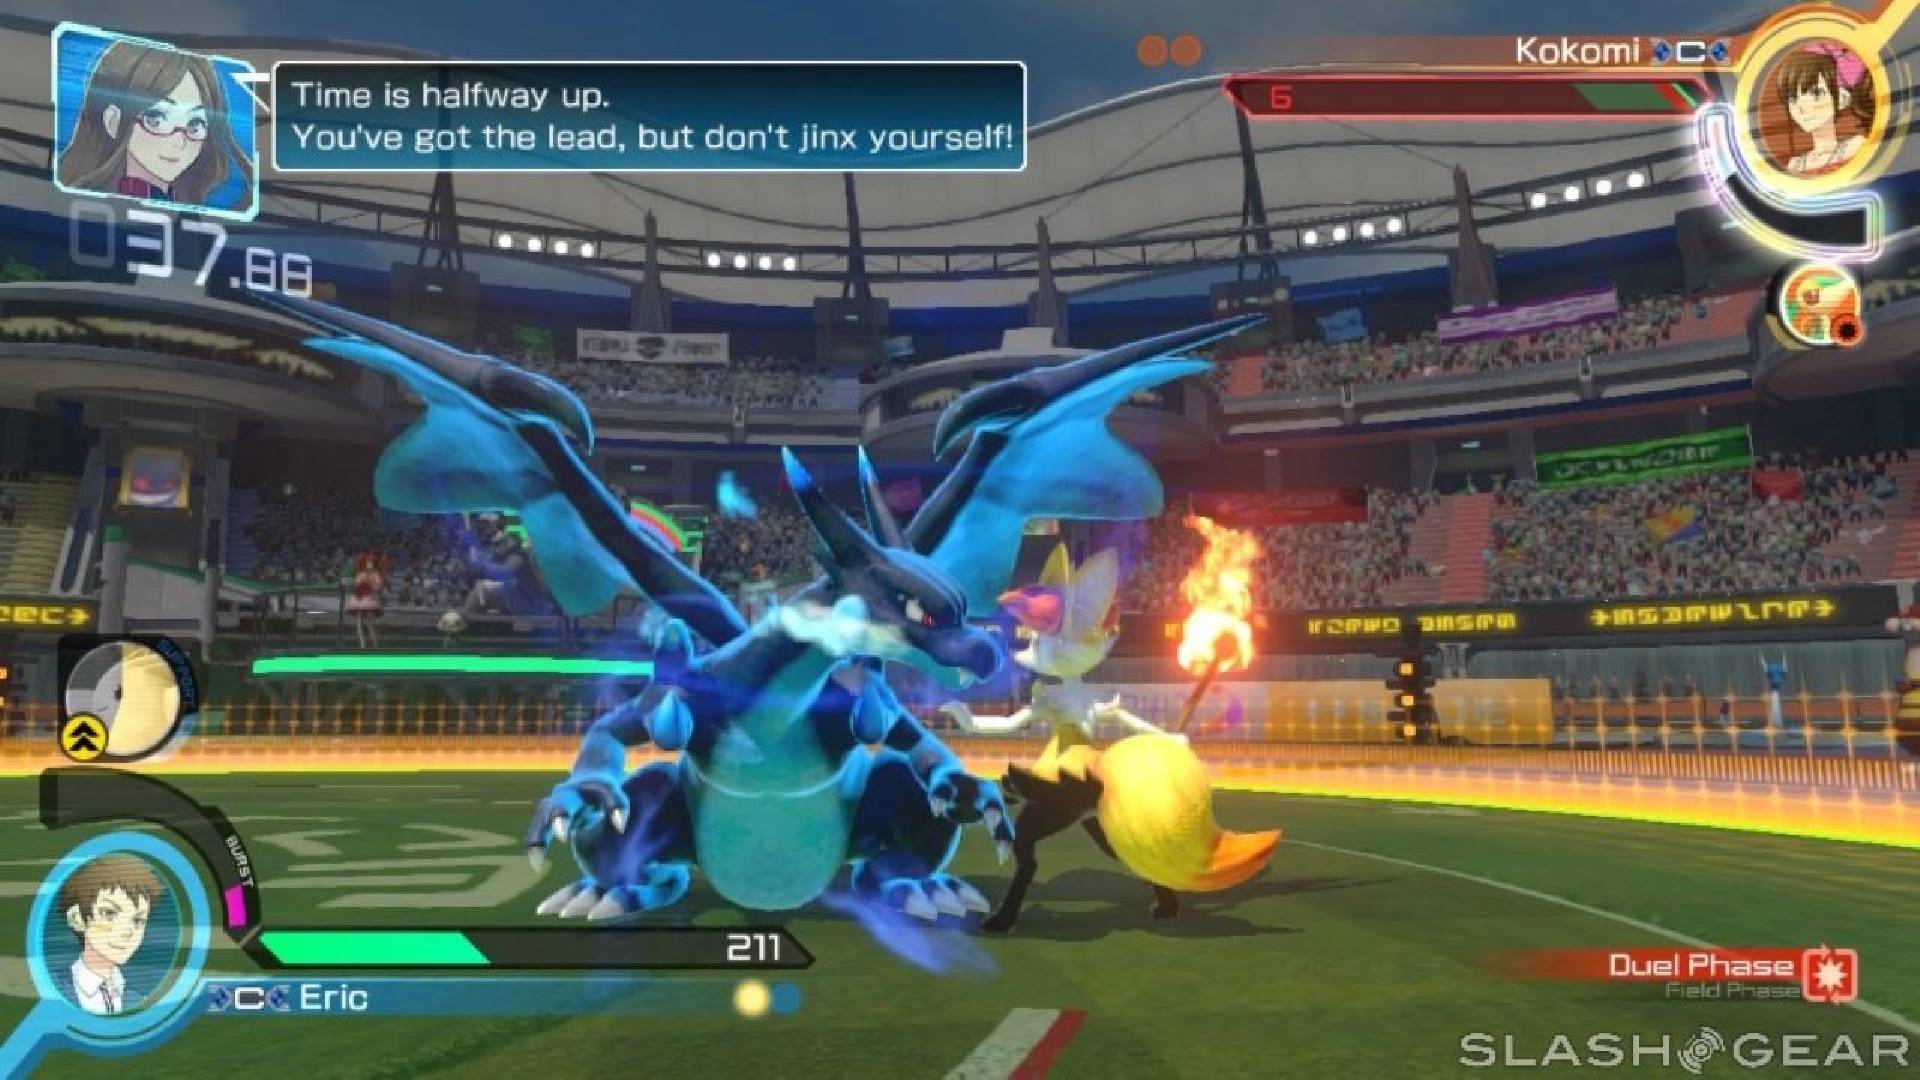 A Mega Charizard and a Braixen face off in battle